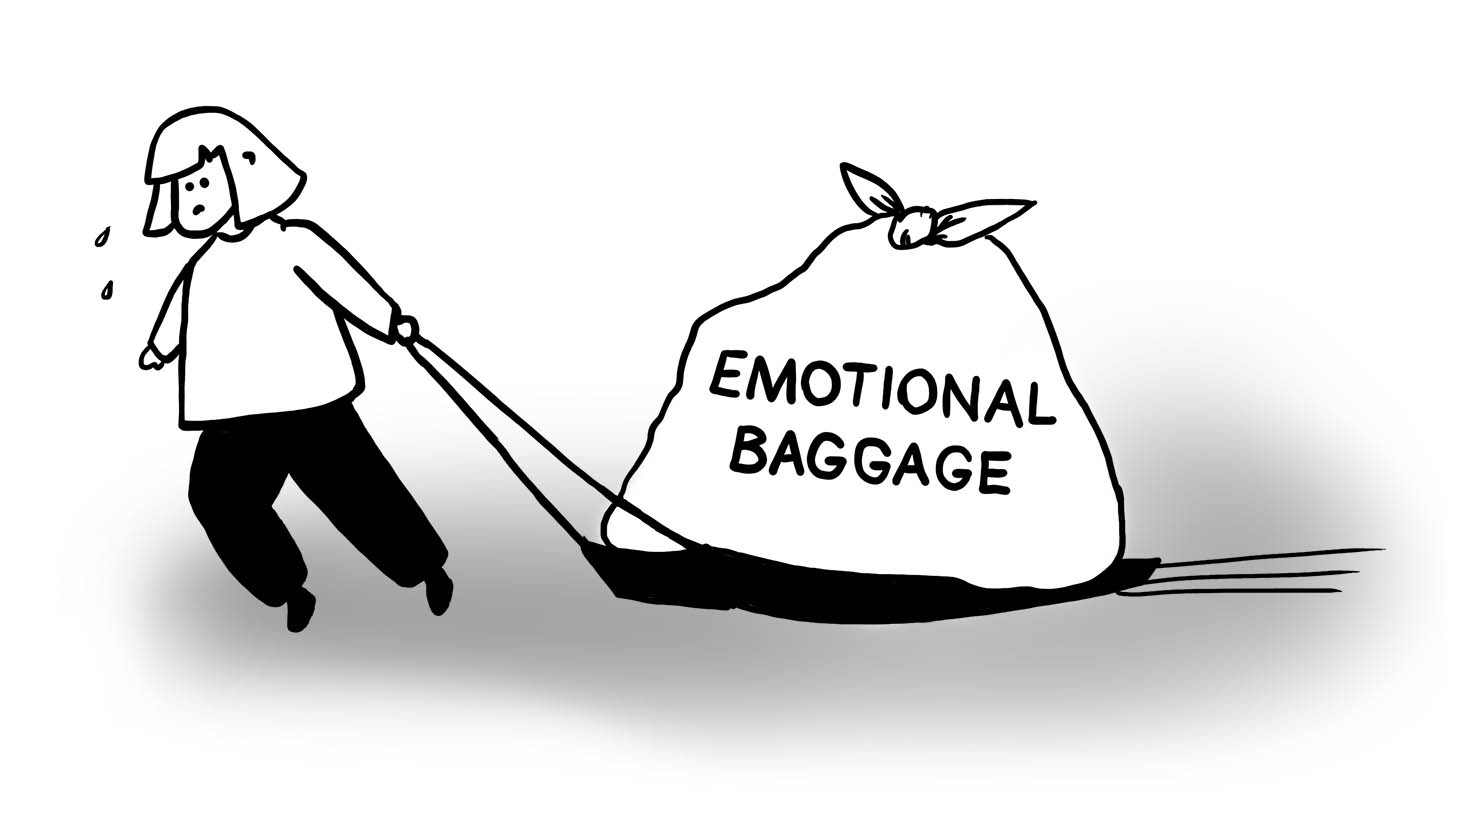 A person drags a huge sled of emotional baggage as they walk